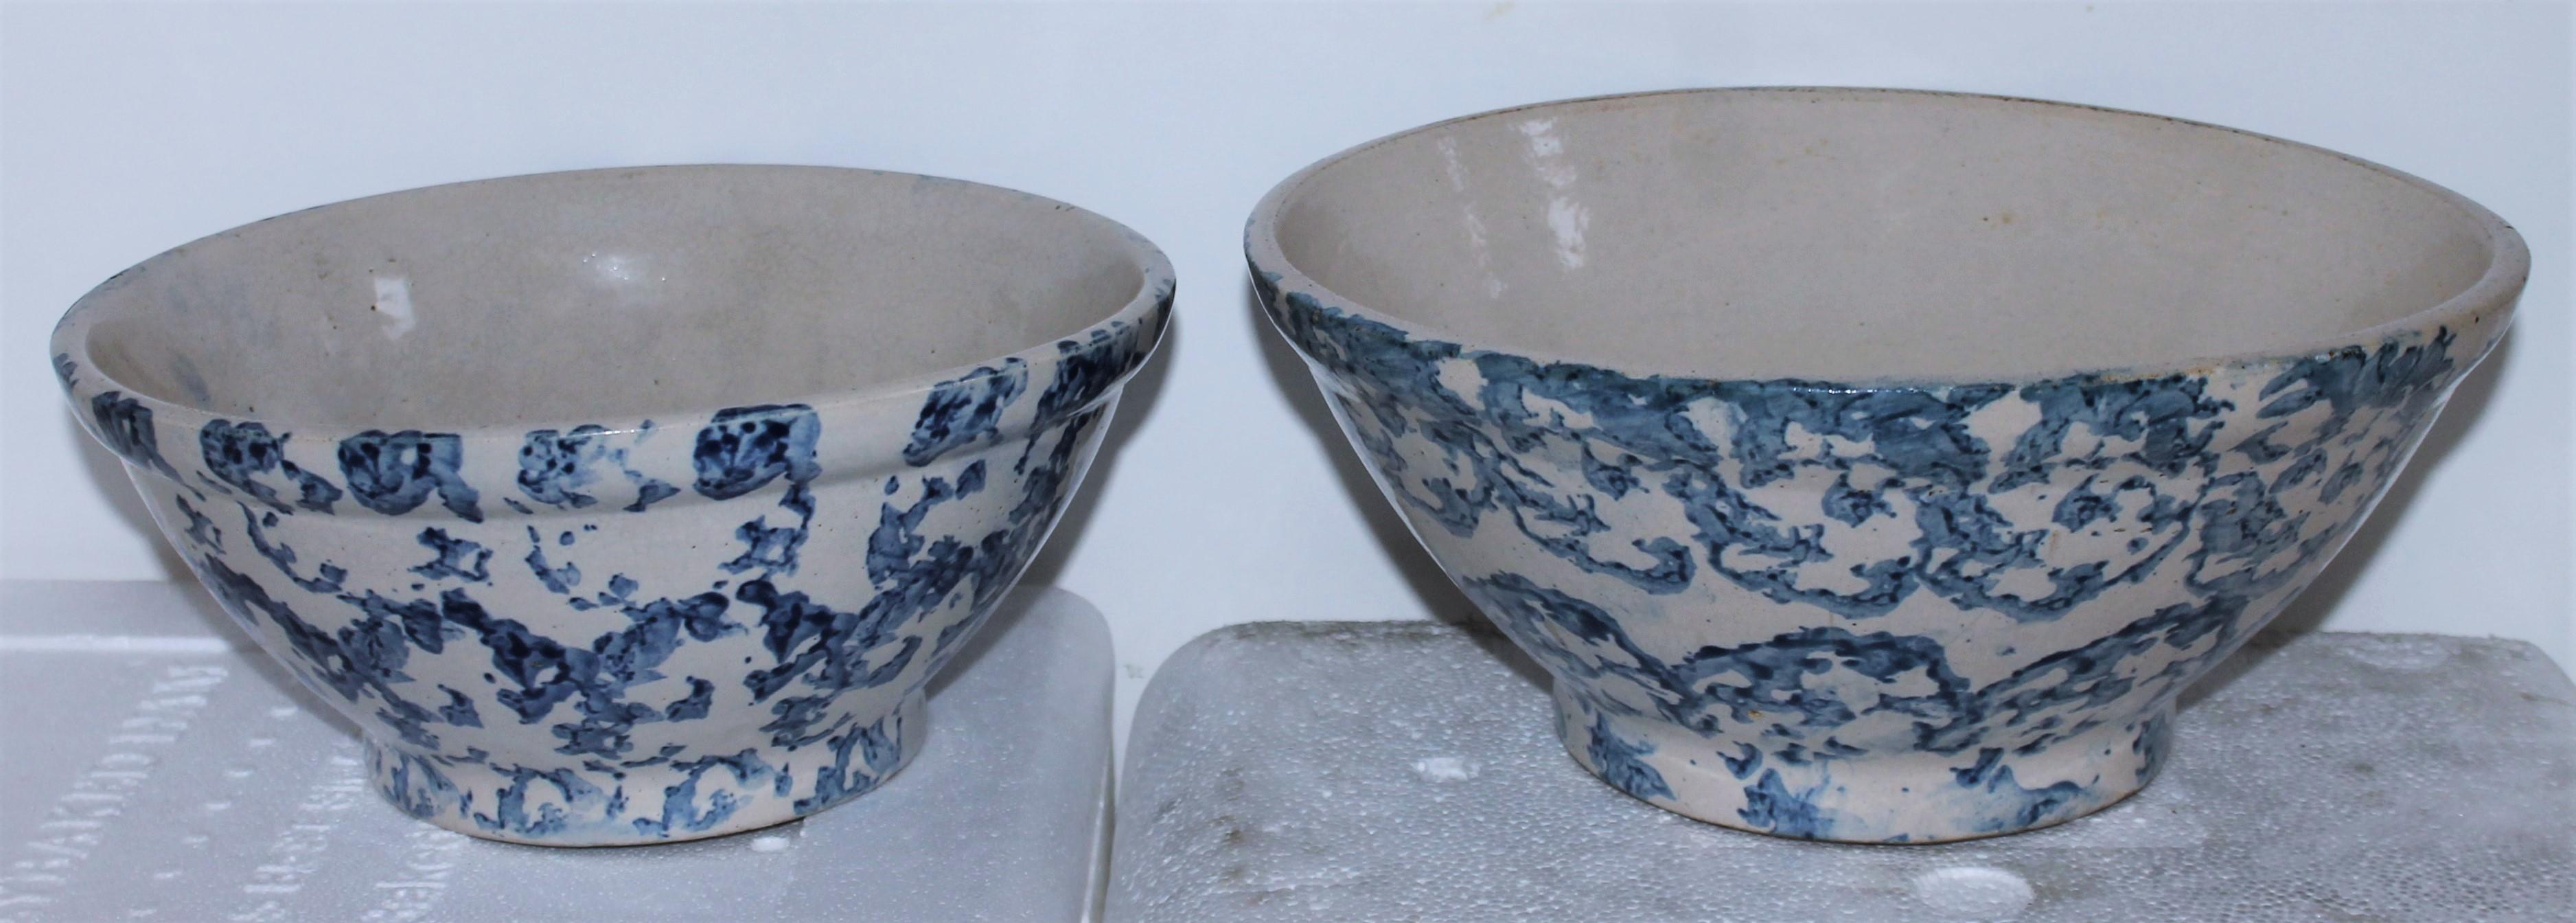 19Thc sponge ware pottery mixing bowls in fantastic blues. The pair are in pristine condition. Great in any country kitchen collection.

Measures: Smaller bowl 10 x 4.5

Larger bowl 11.75 x 5.25.